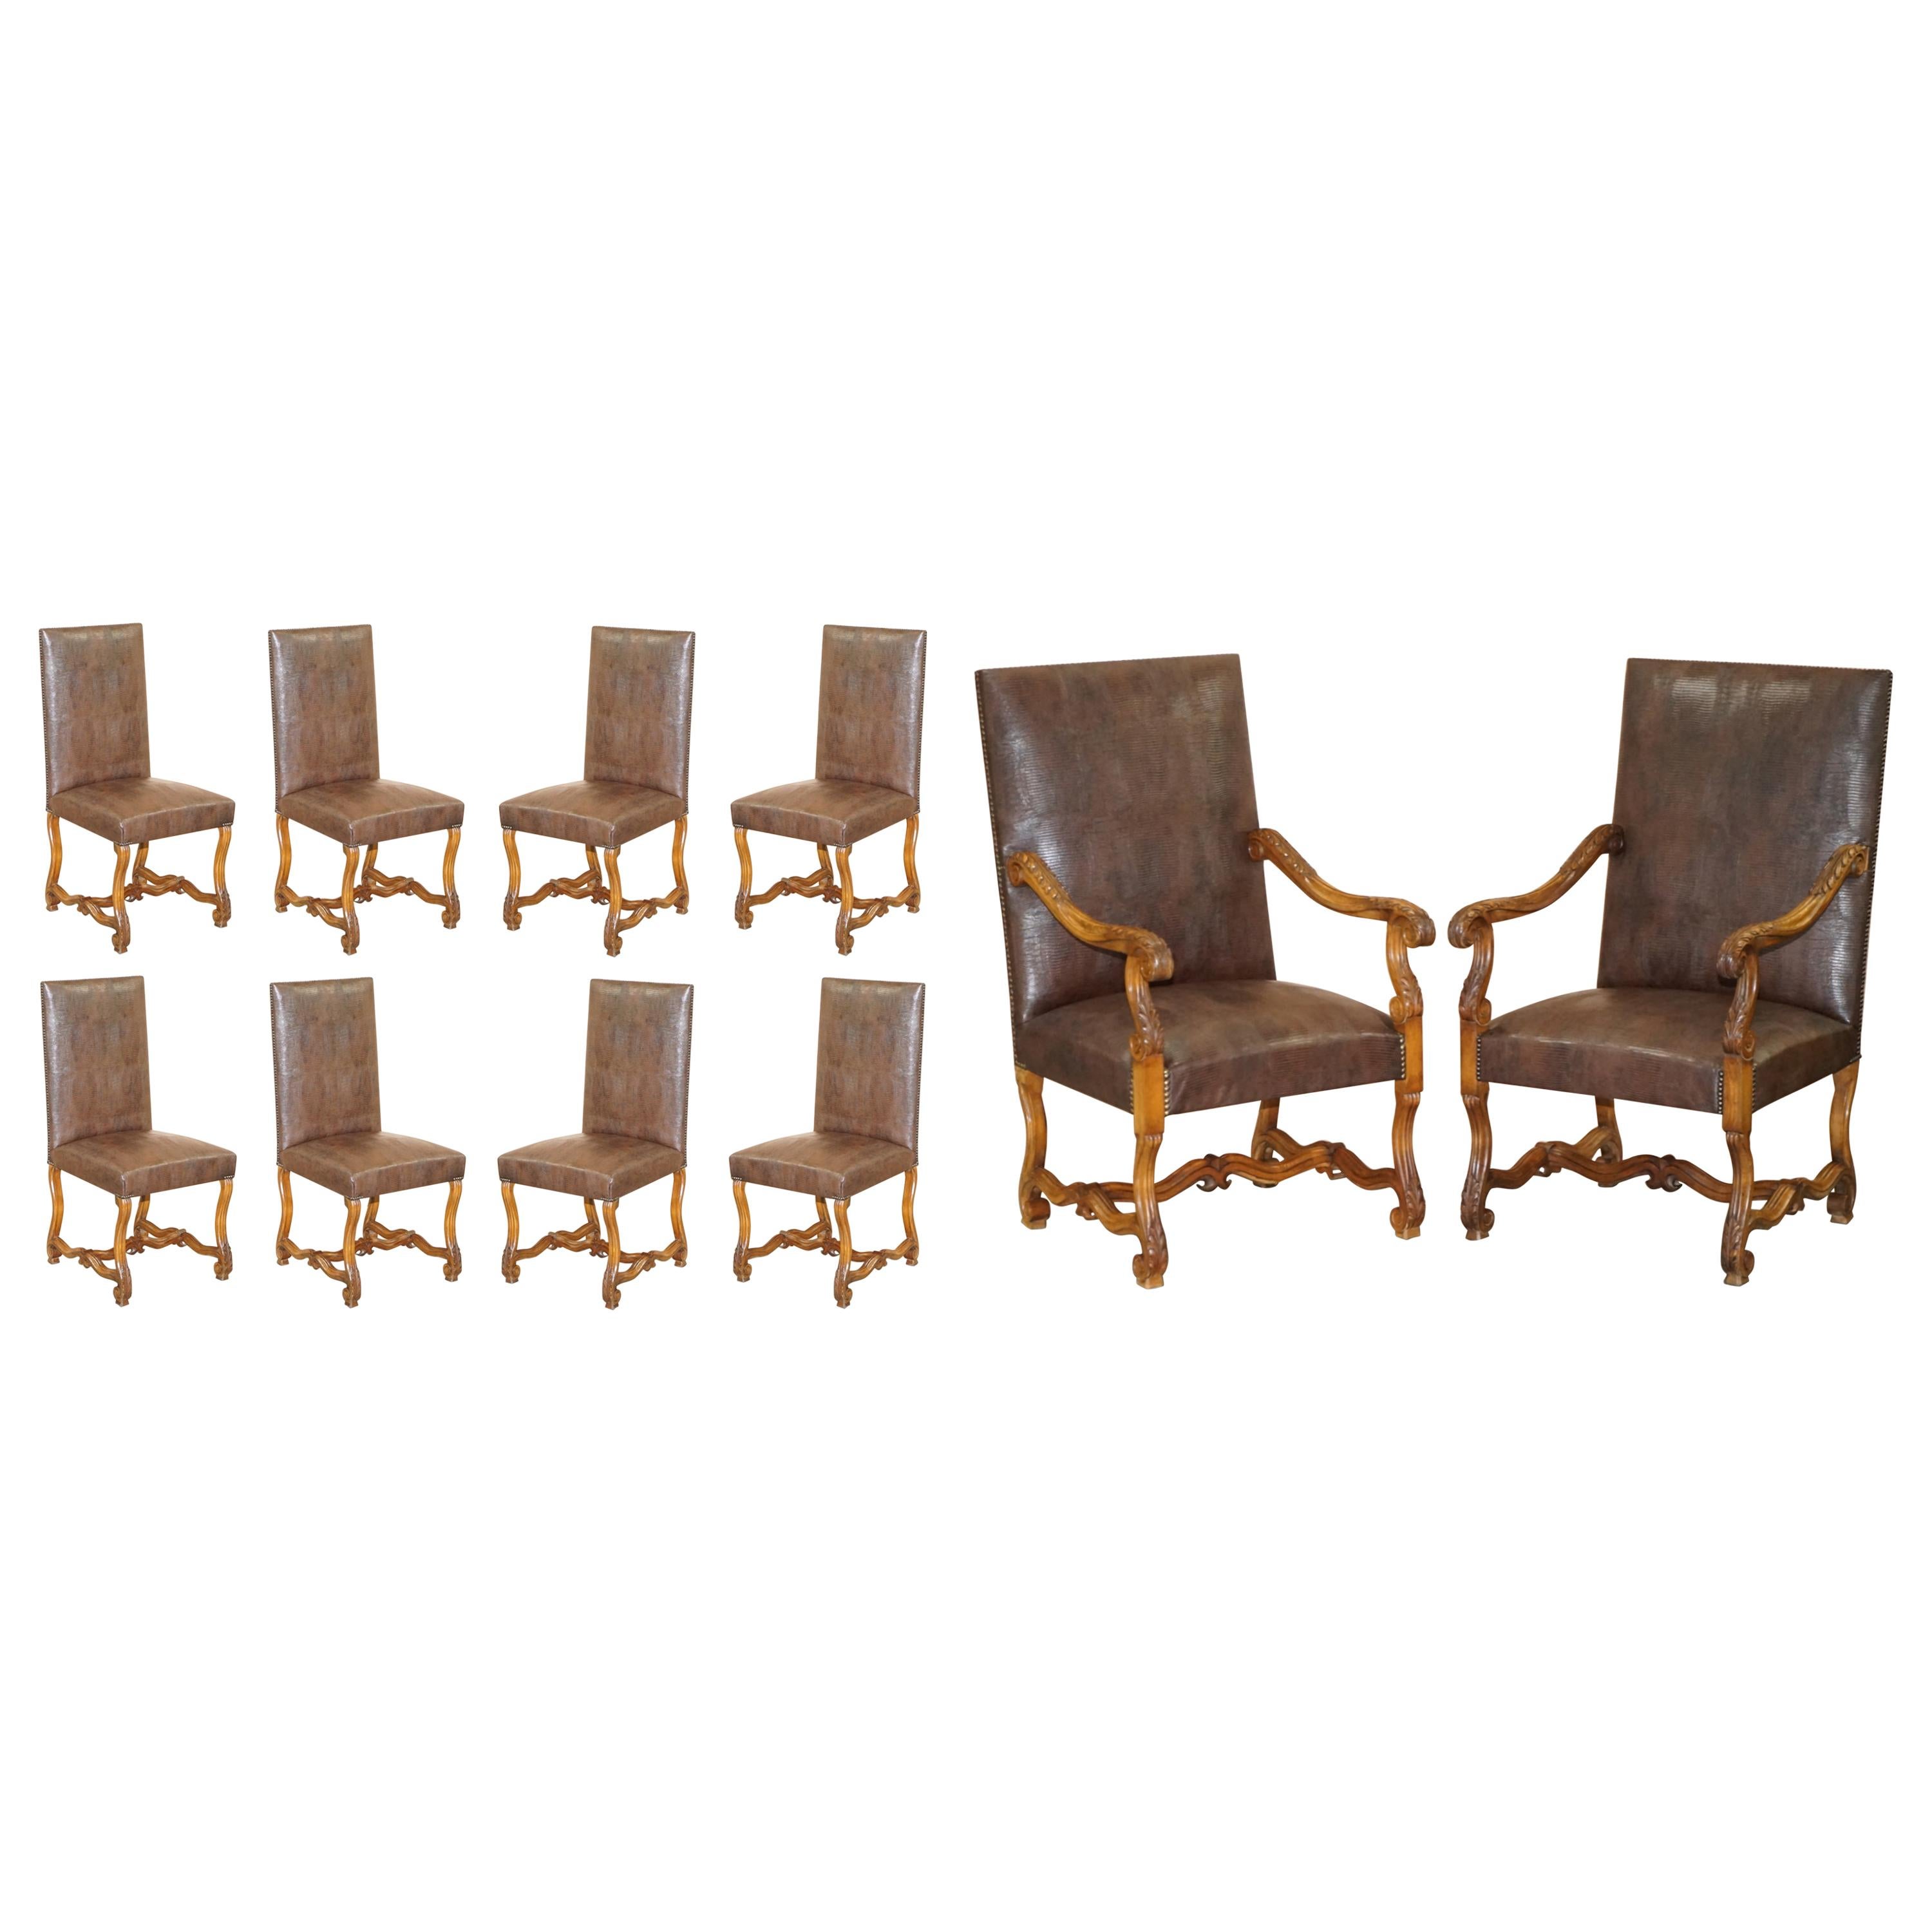 Suite of 10 Carolean Dining Chairs with Crocodile Alligator Patina Leather Ten